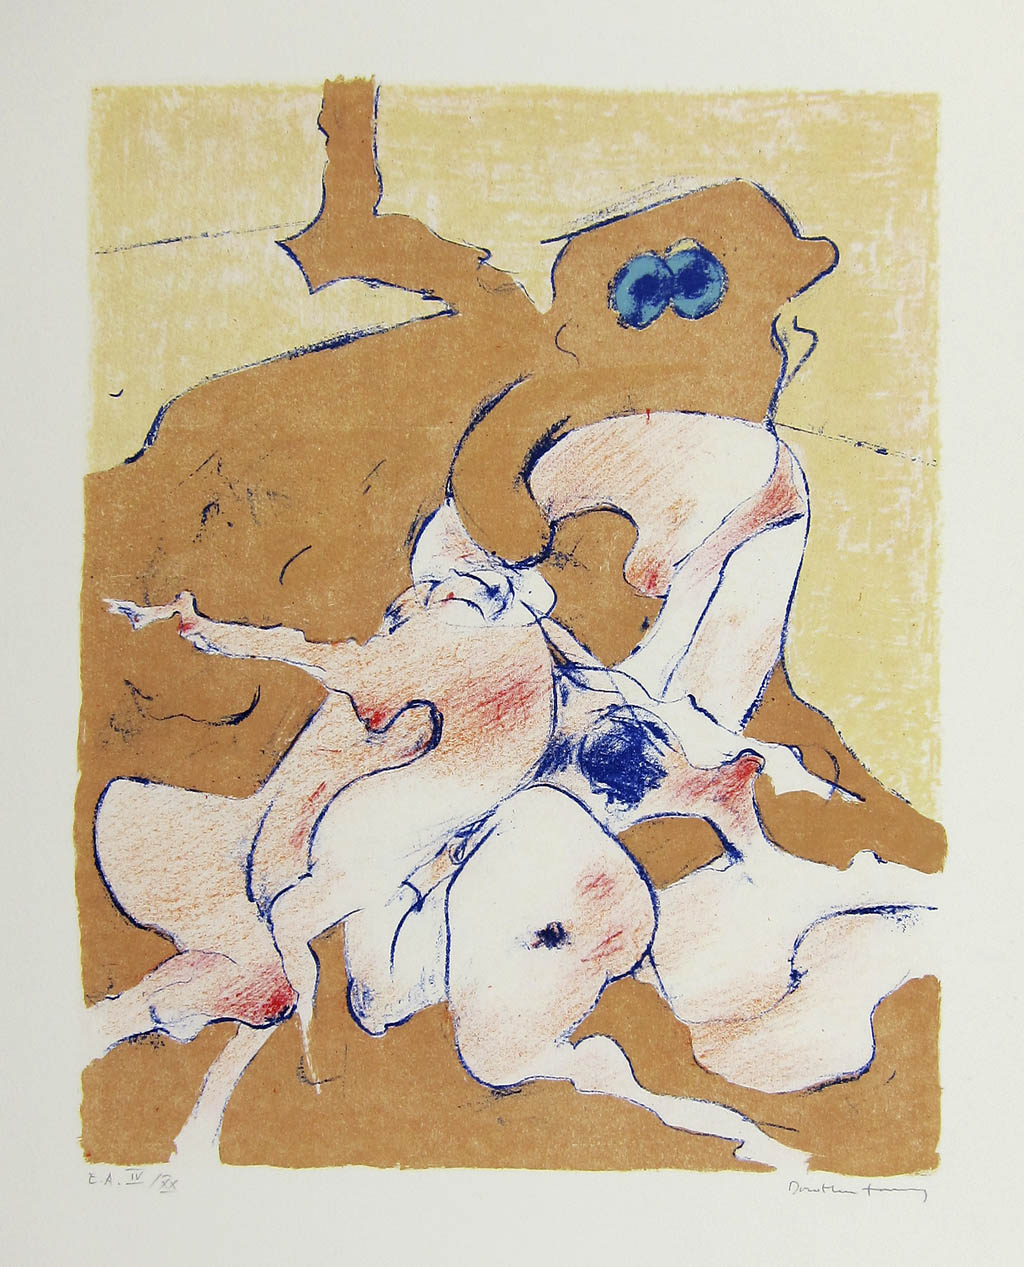 Dorothea Tanning - Untitled (for XXe siecle) - 1974 color lithograph